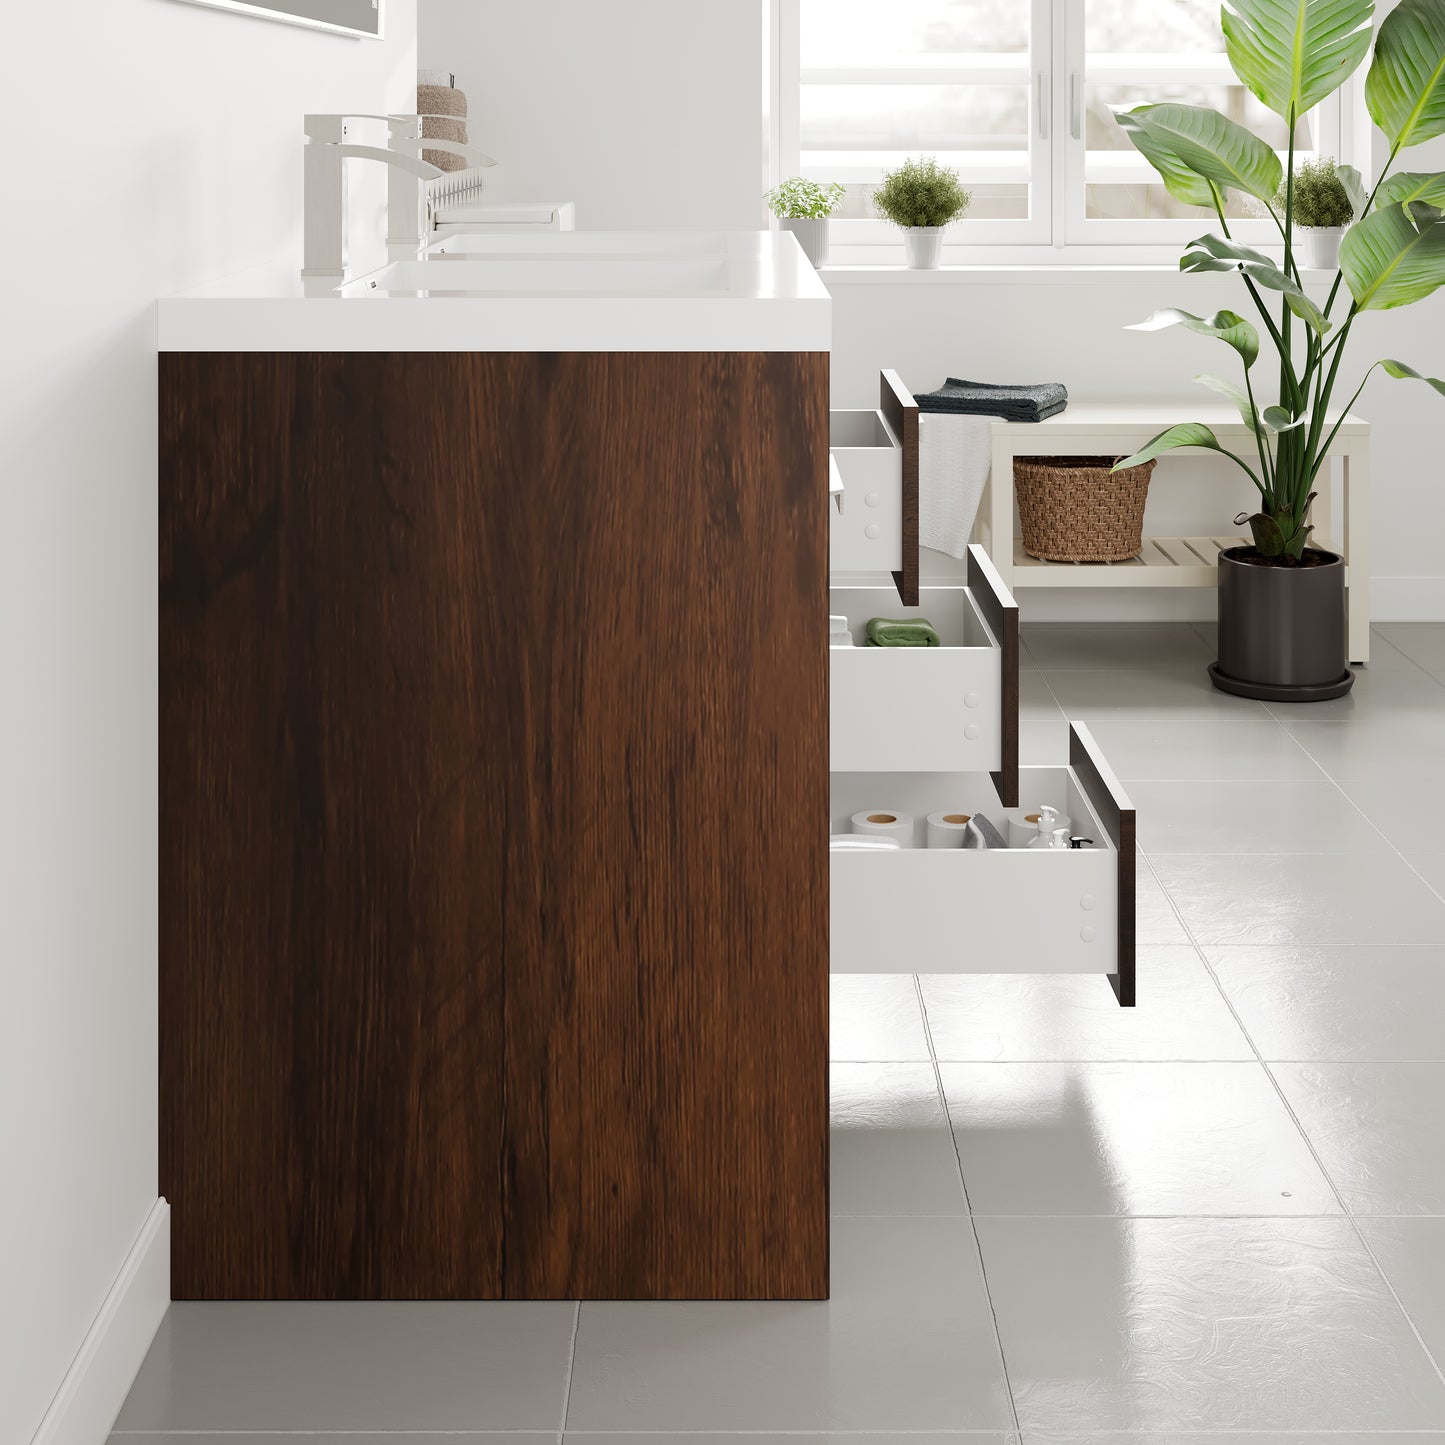 Lugano 48"W x 20"D Rosewood Double Sink Bathroom Vanity with Acrylic Countertop and Integrated Sink